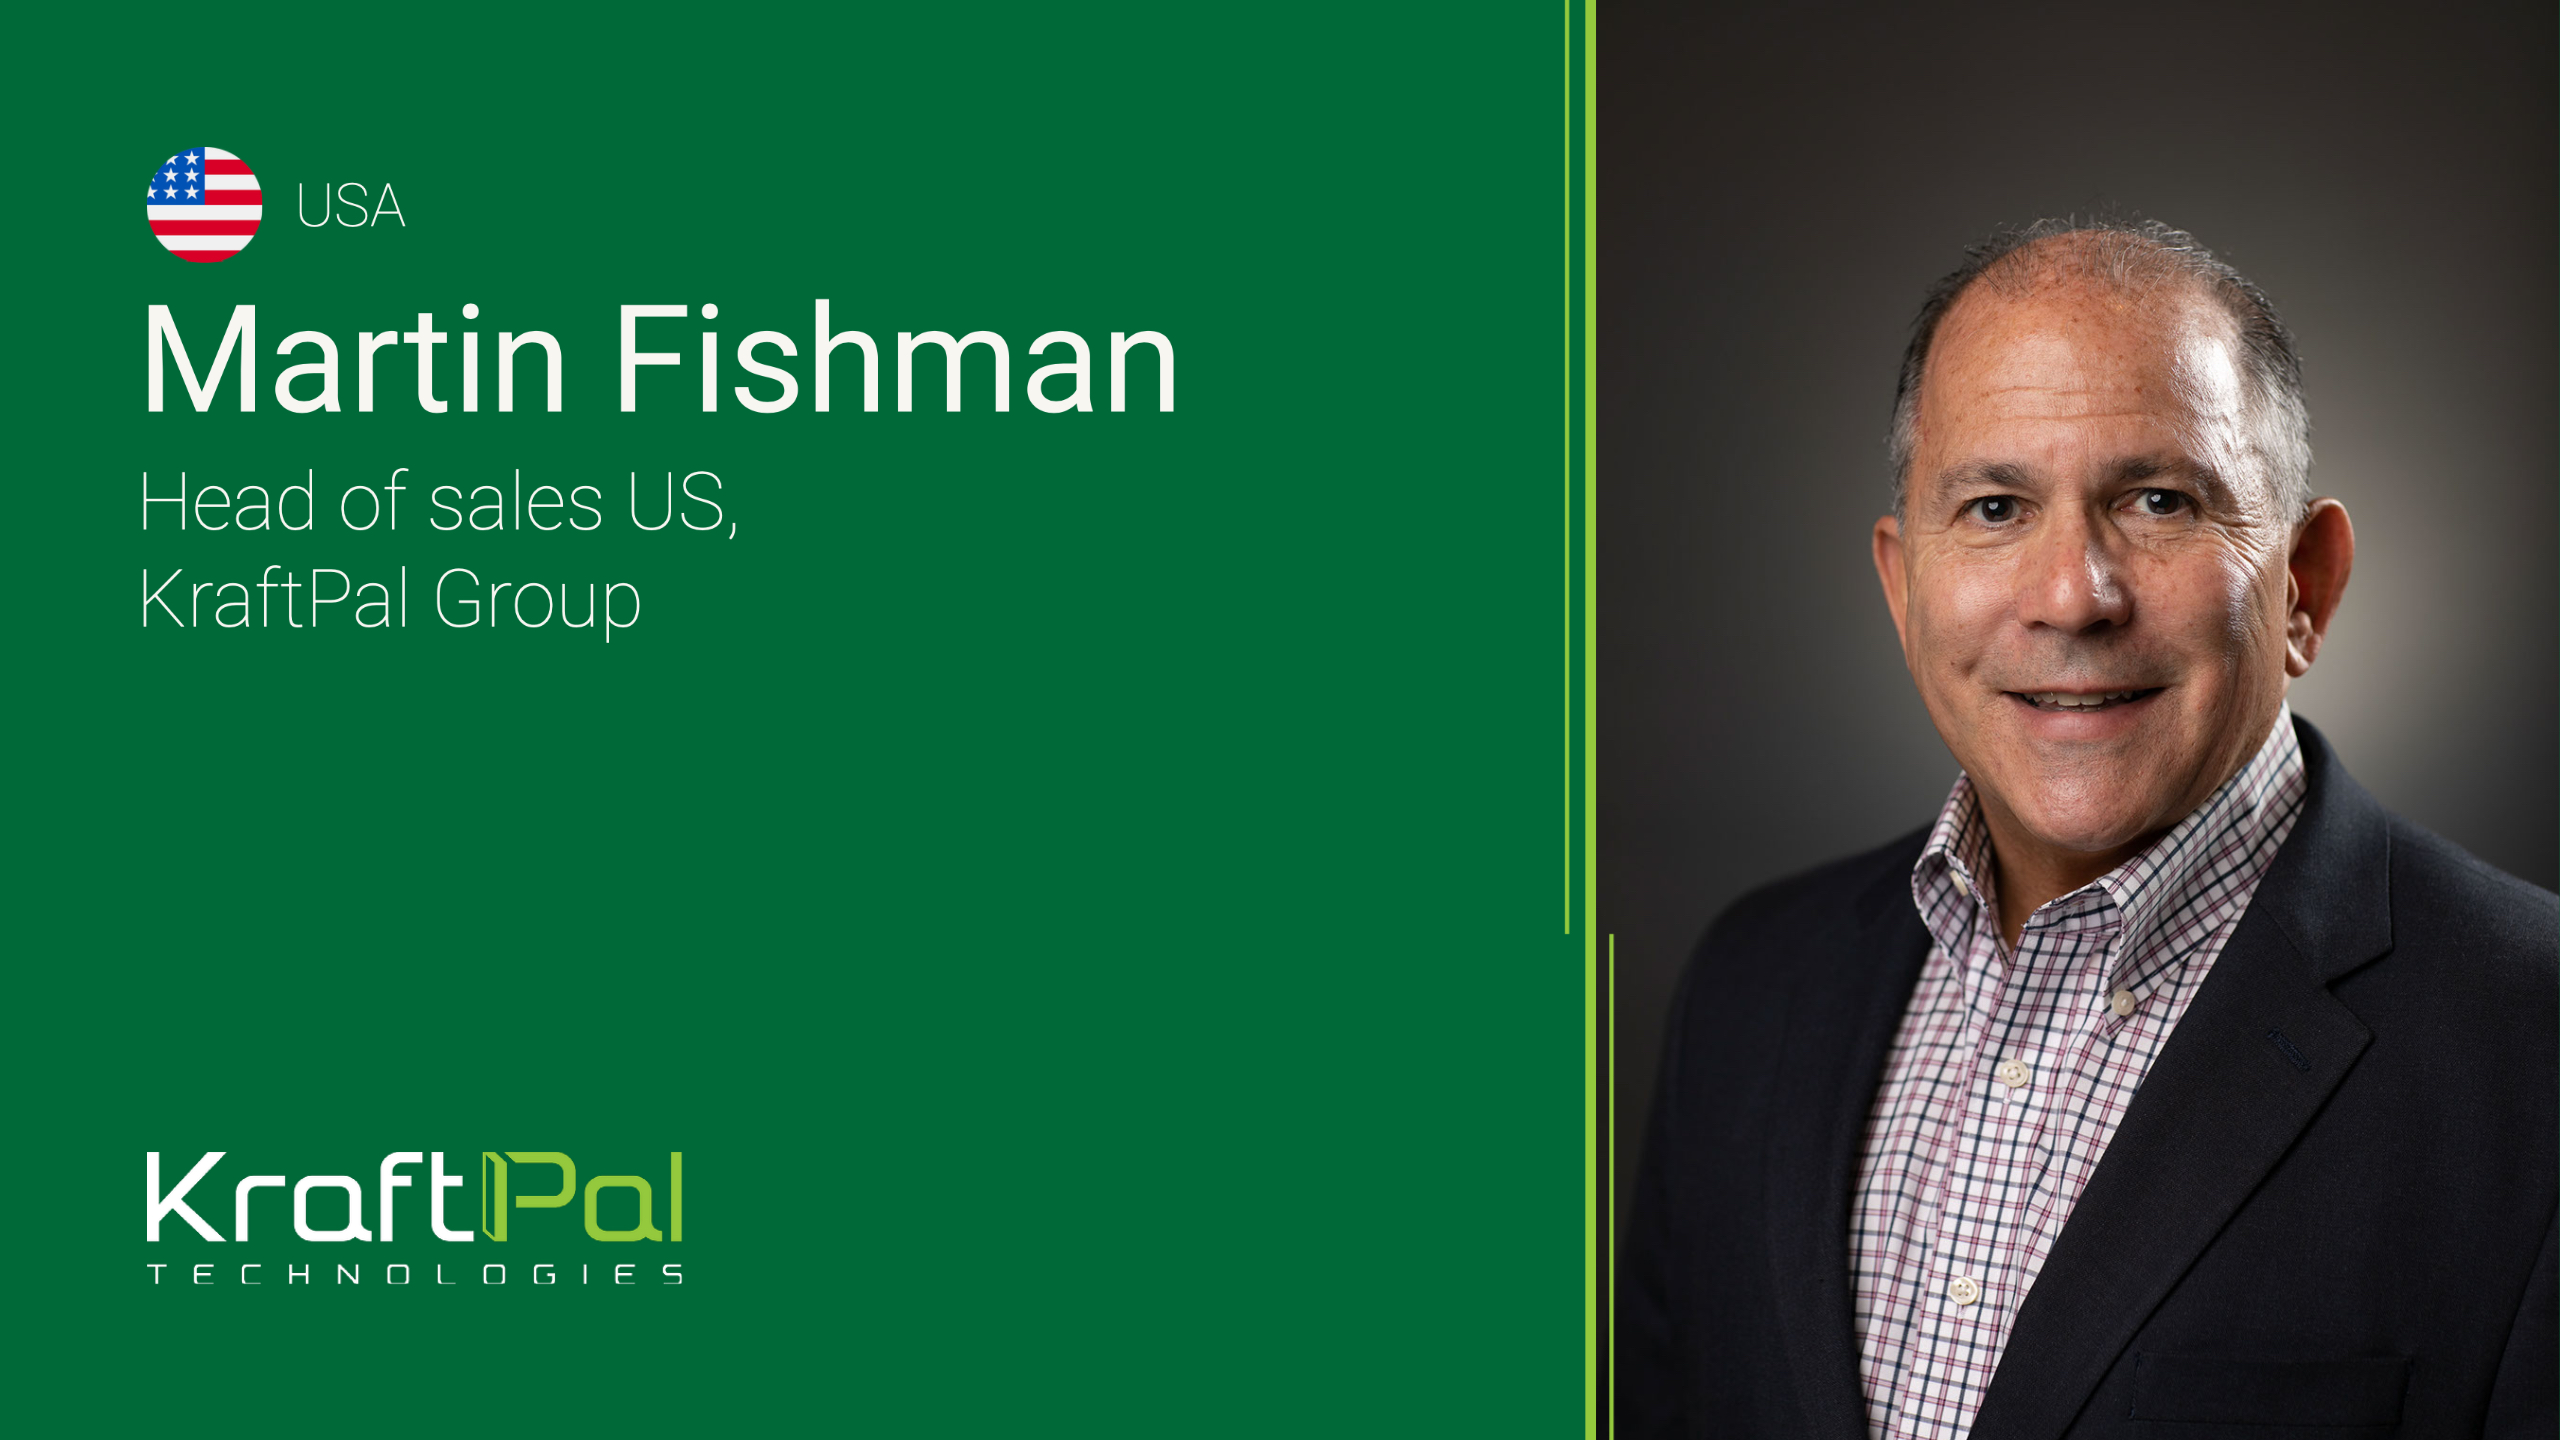 KraftPal Technologies Announces Martin Fishman as Head of Sales for the United States